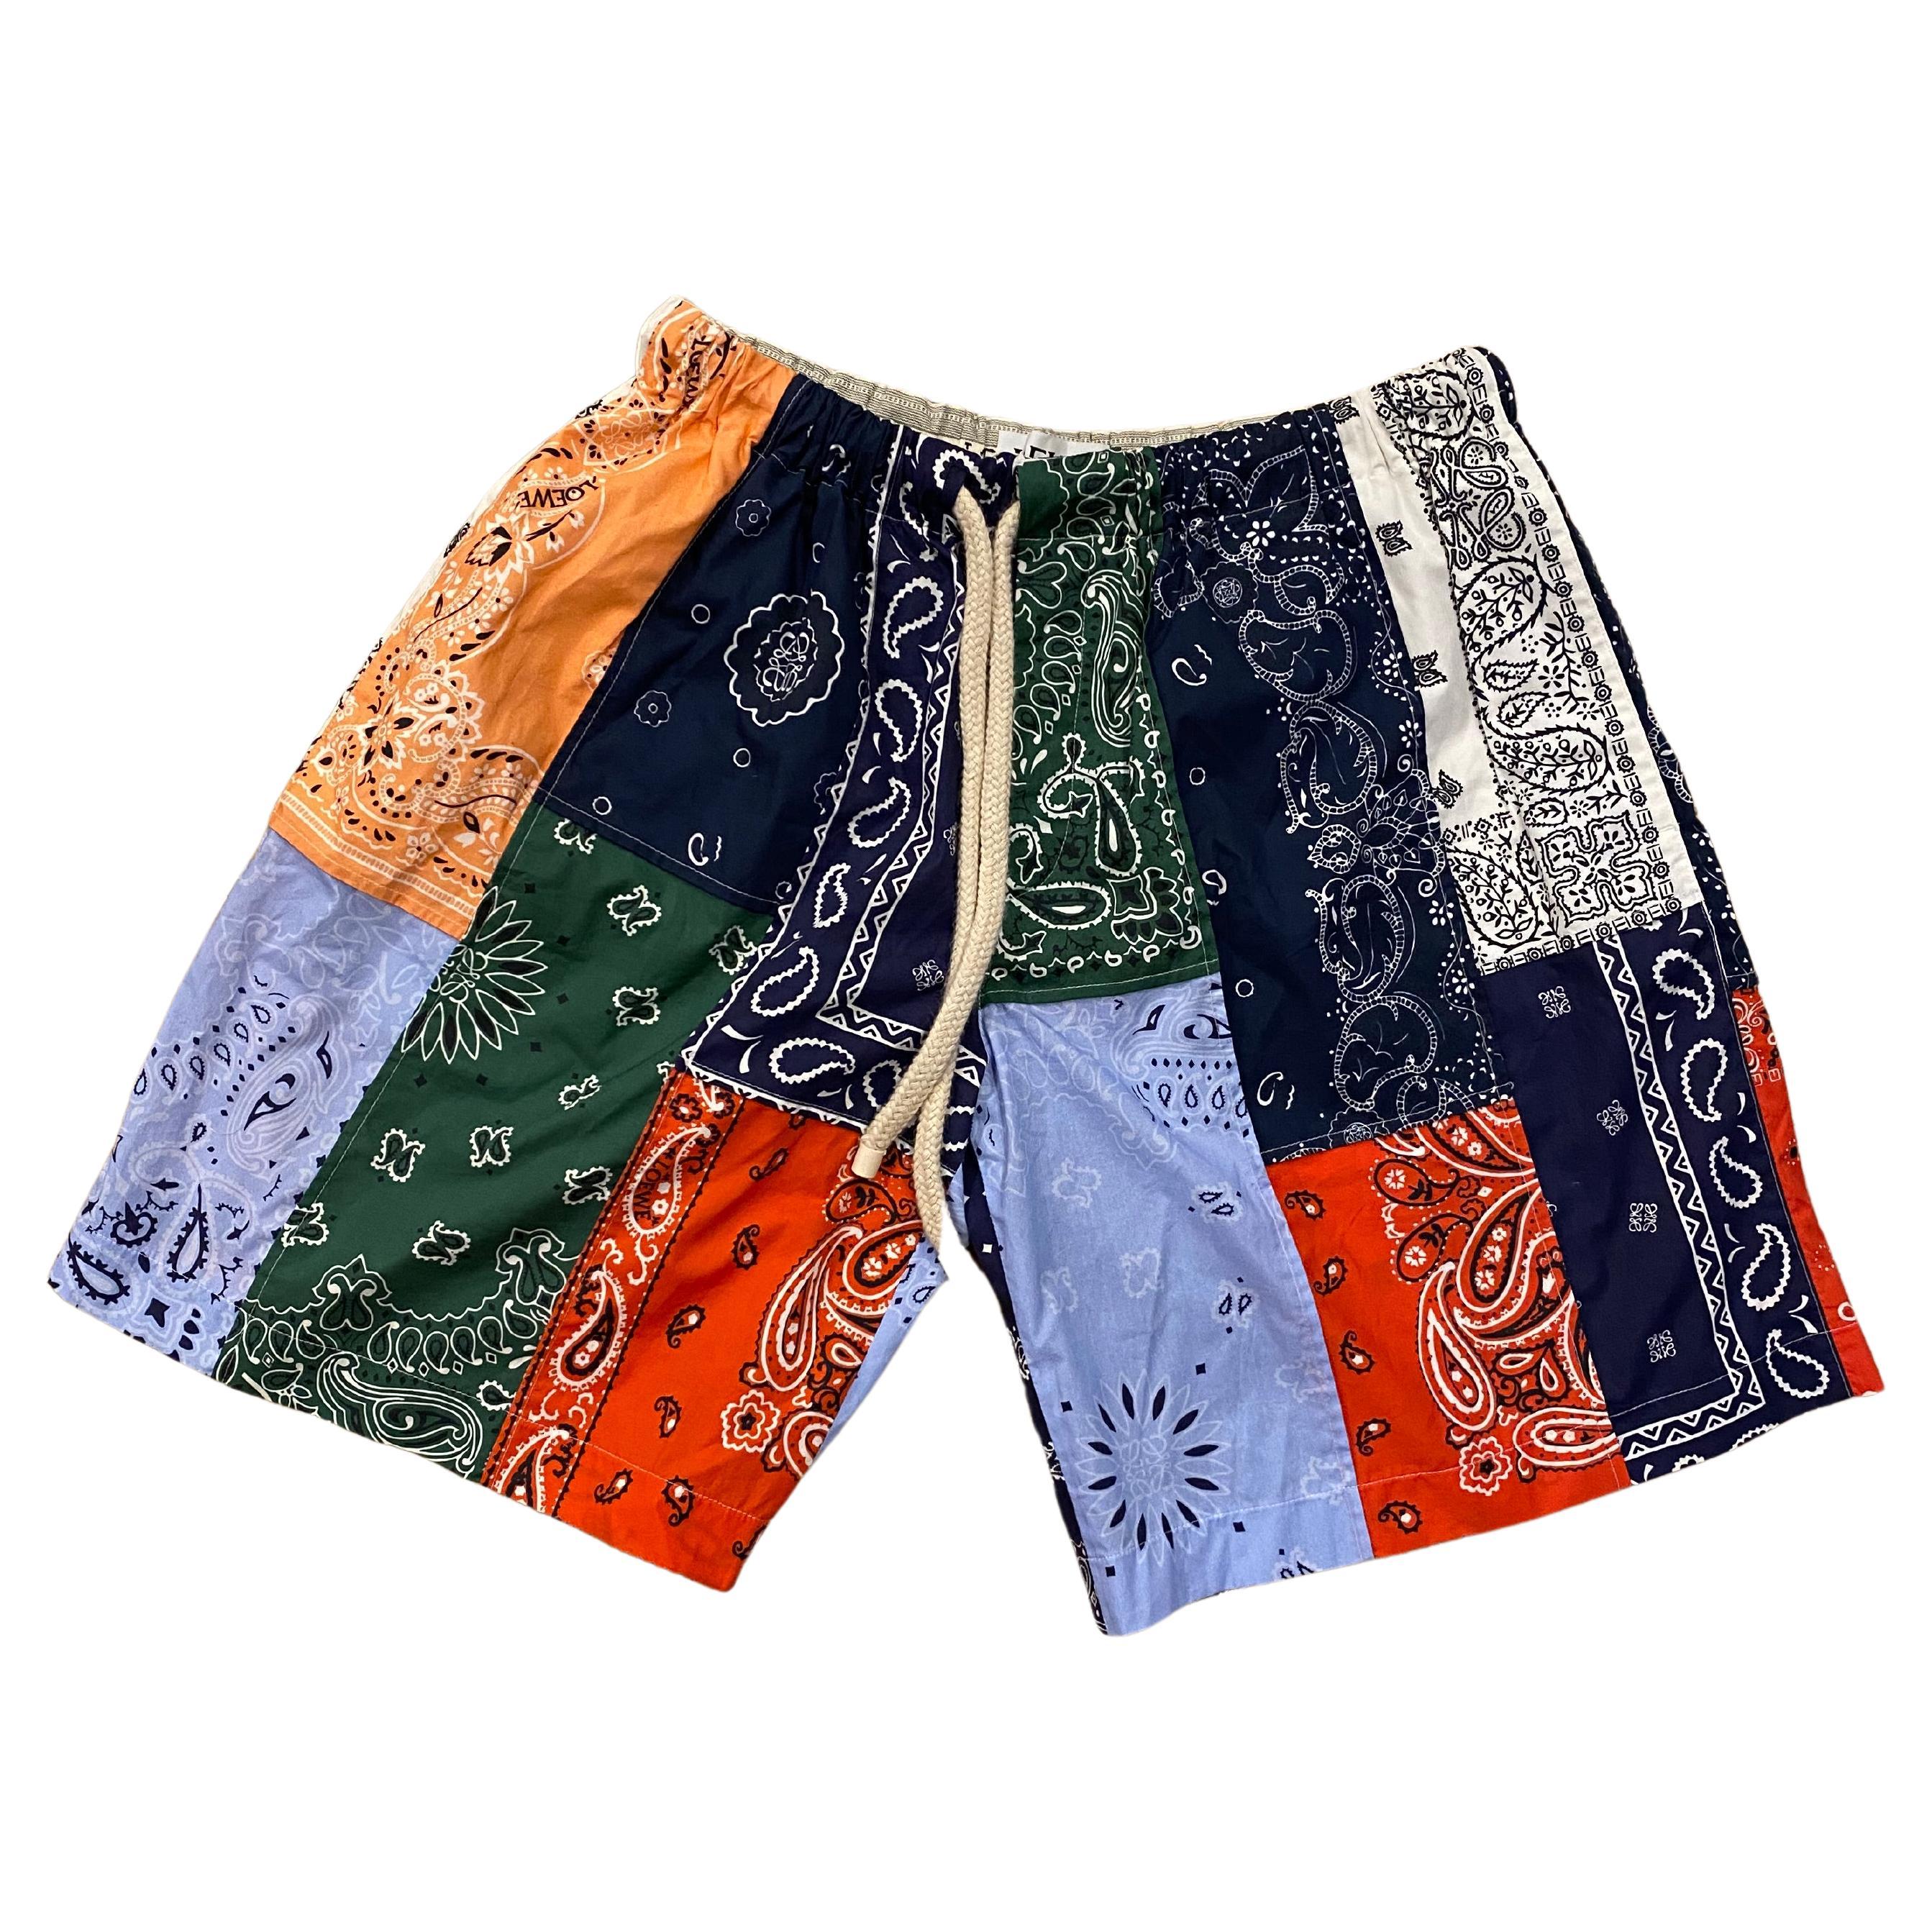 Loewe Bandana Patchwork Multi color Shorts, size M For Sale